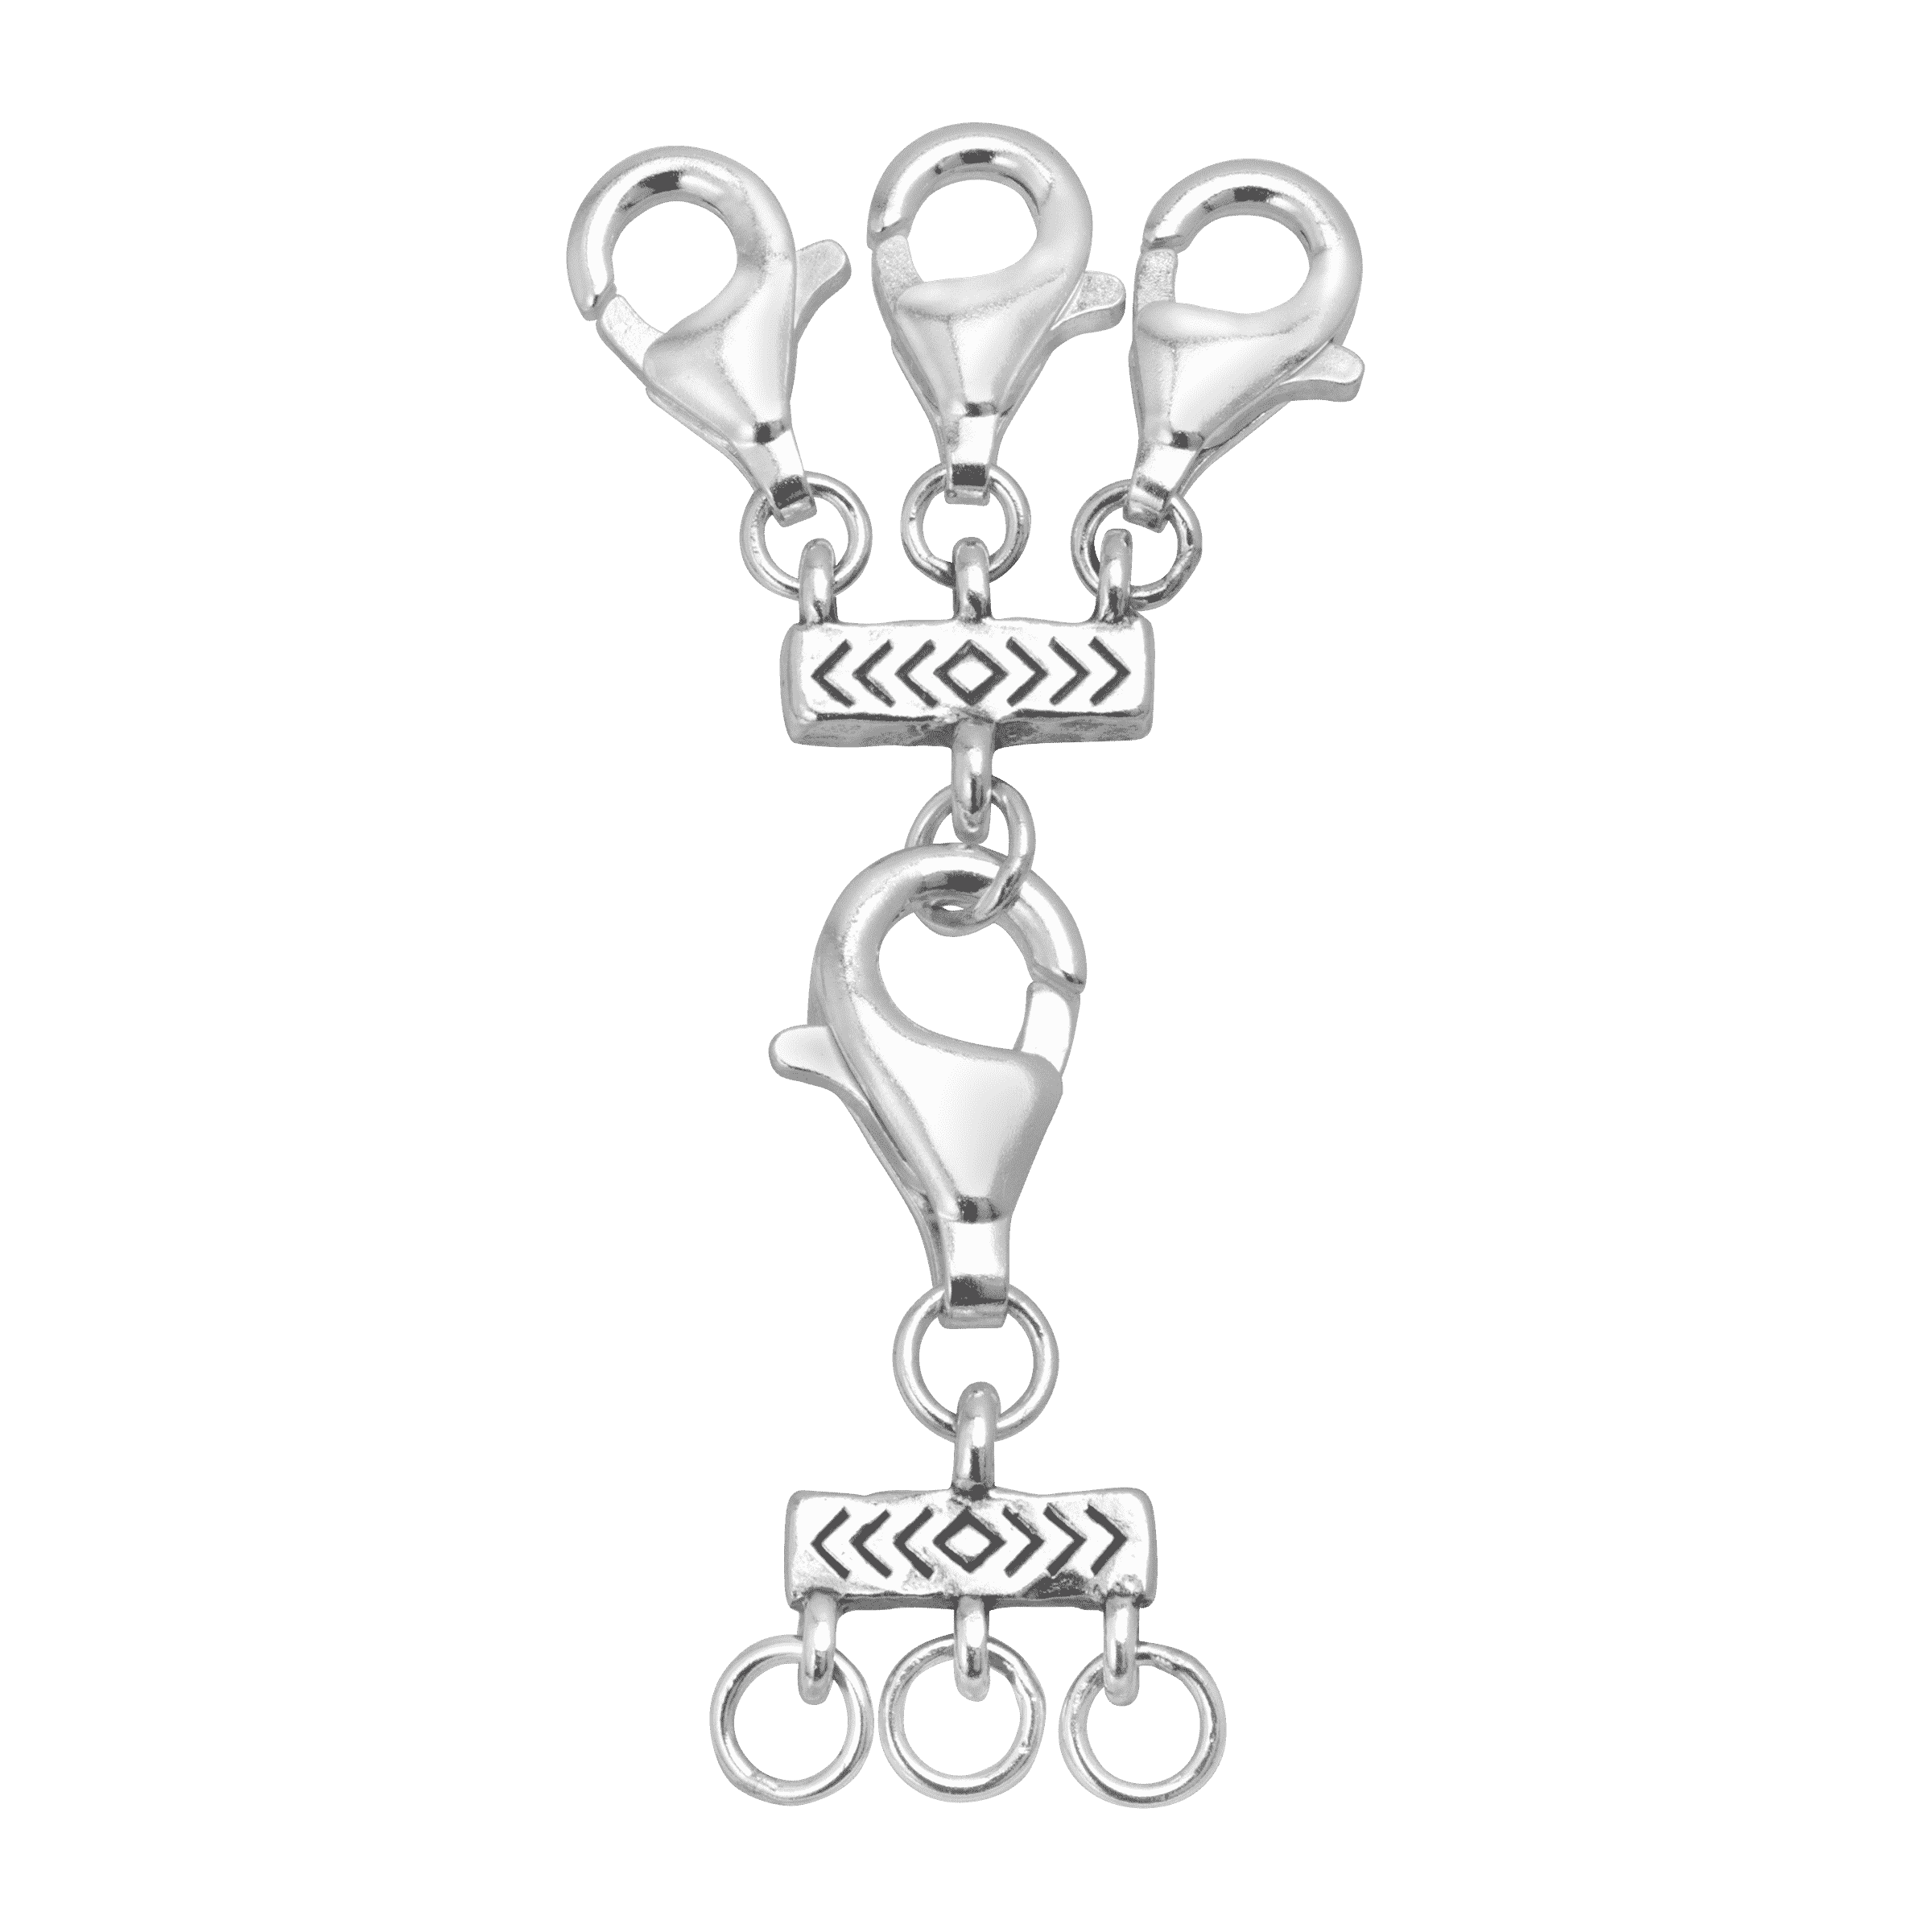  Necklace Separator for Layering Necklace Layering Clasps Silver  Necklace Connectors for Multiple Necklaces（2 PCS）